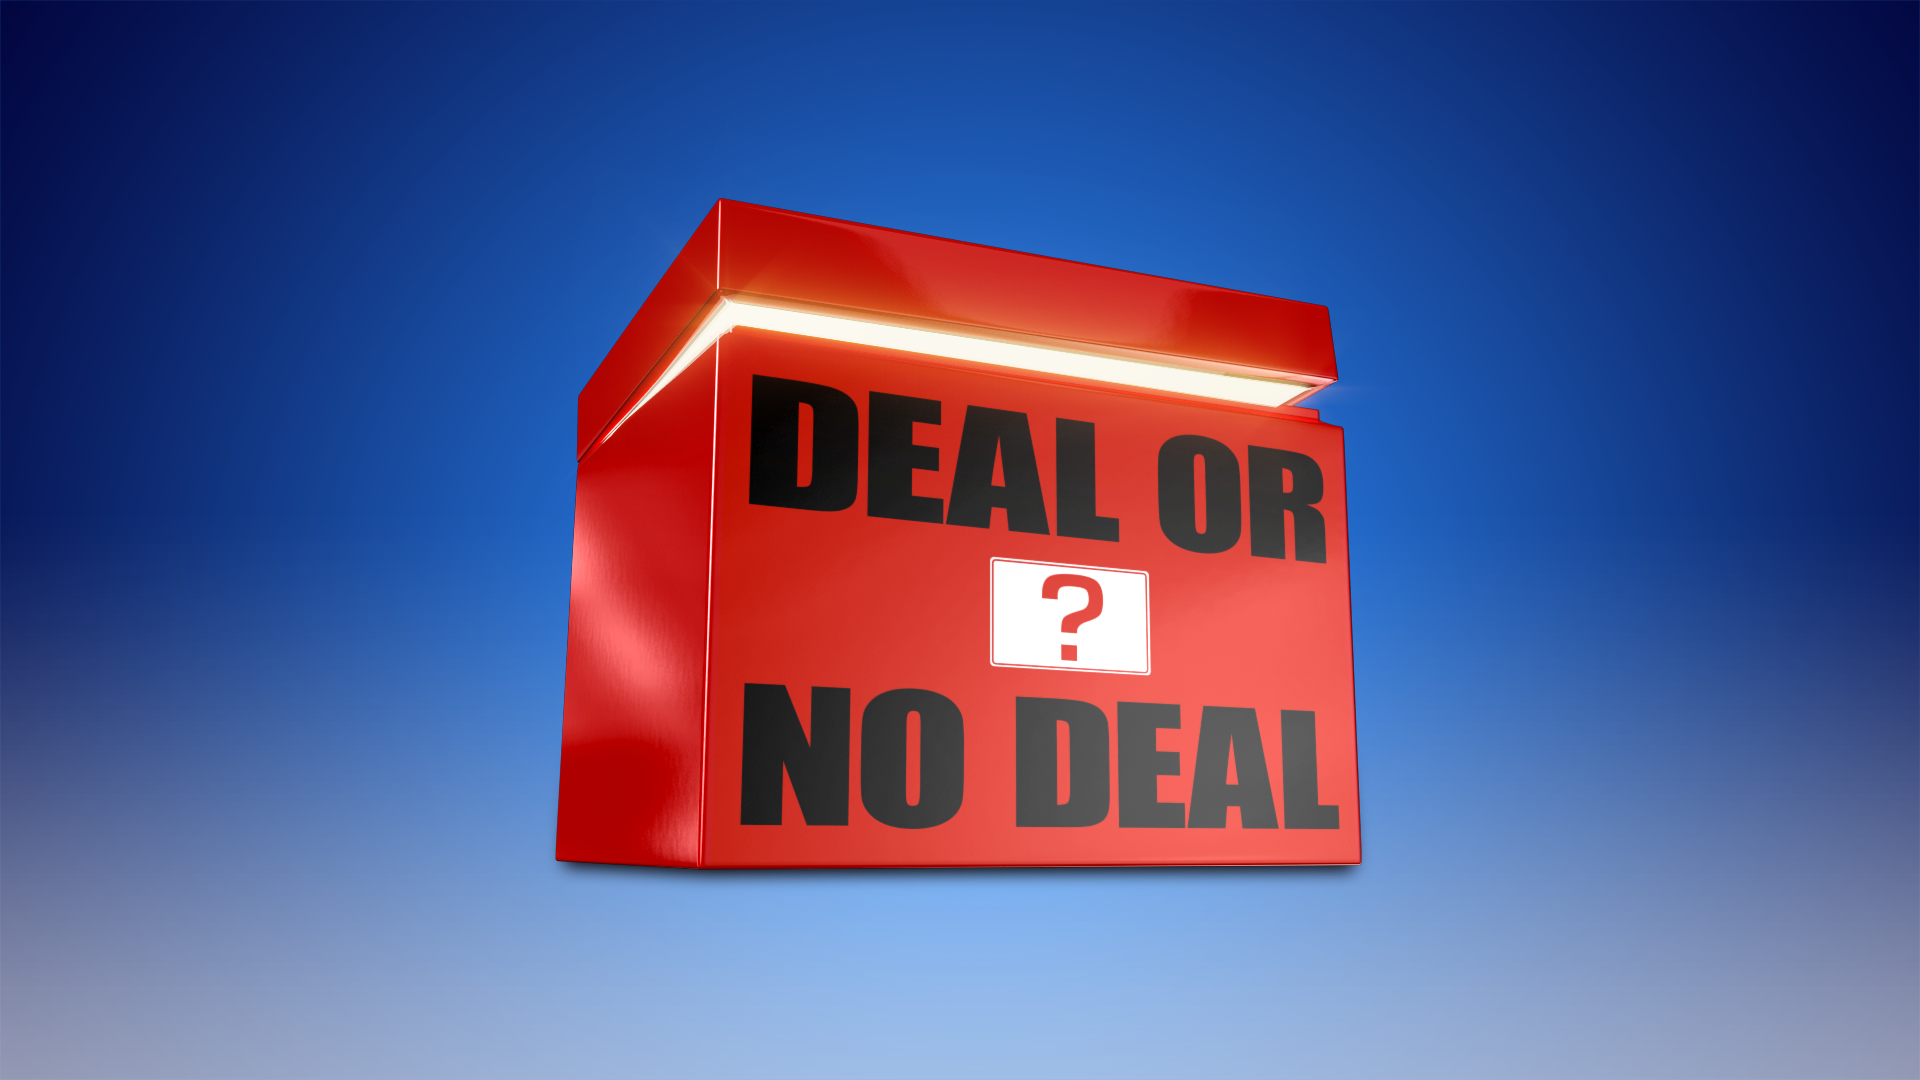 Amazing Deal Or No Deal Pictures & Backgrounds